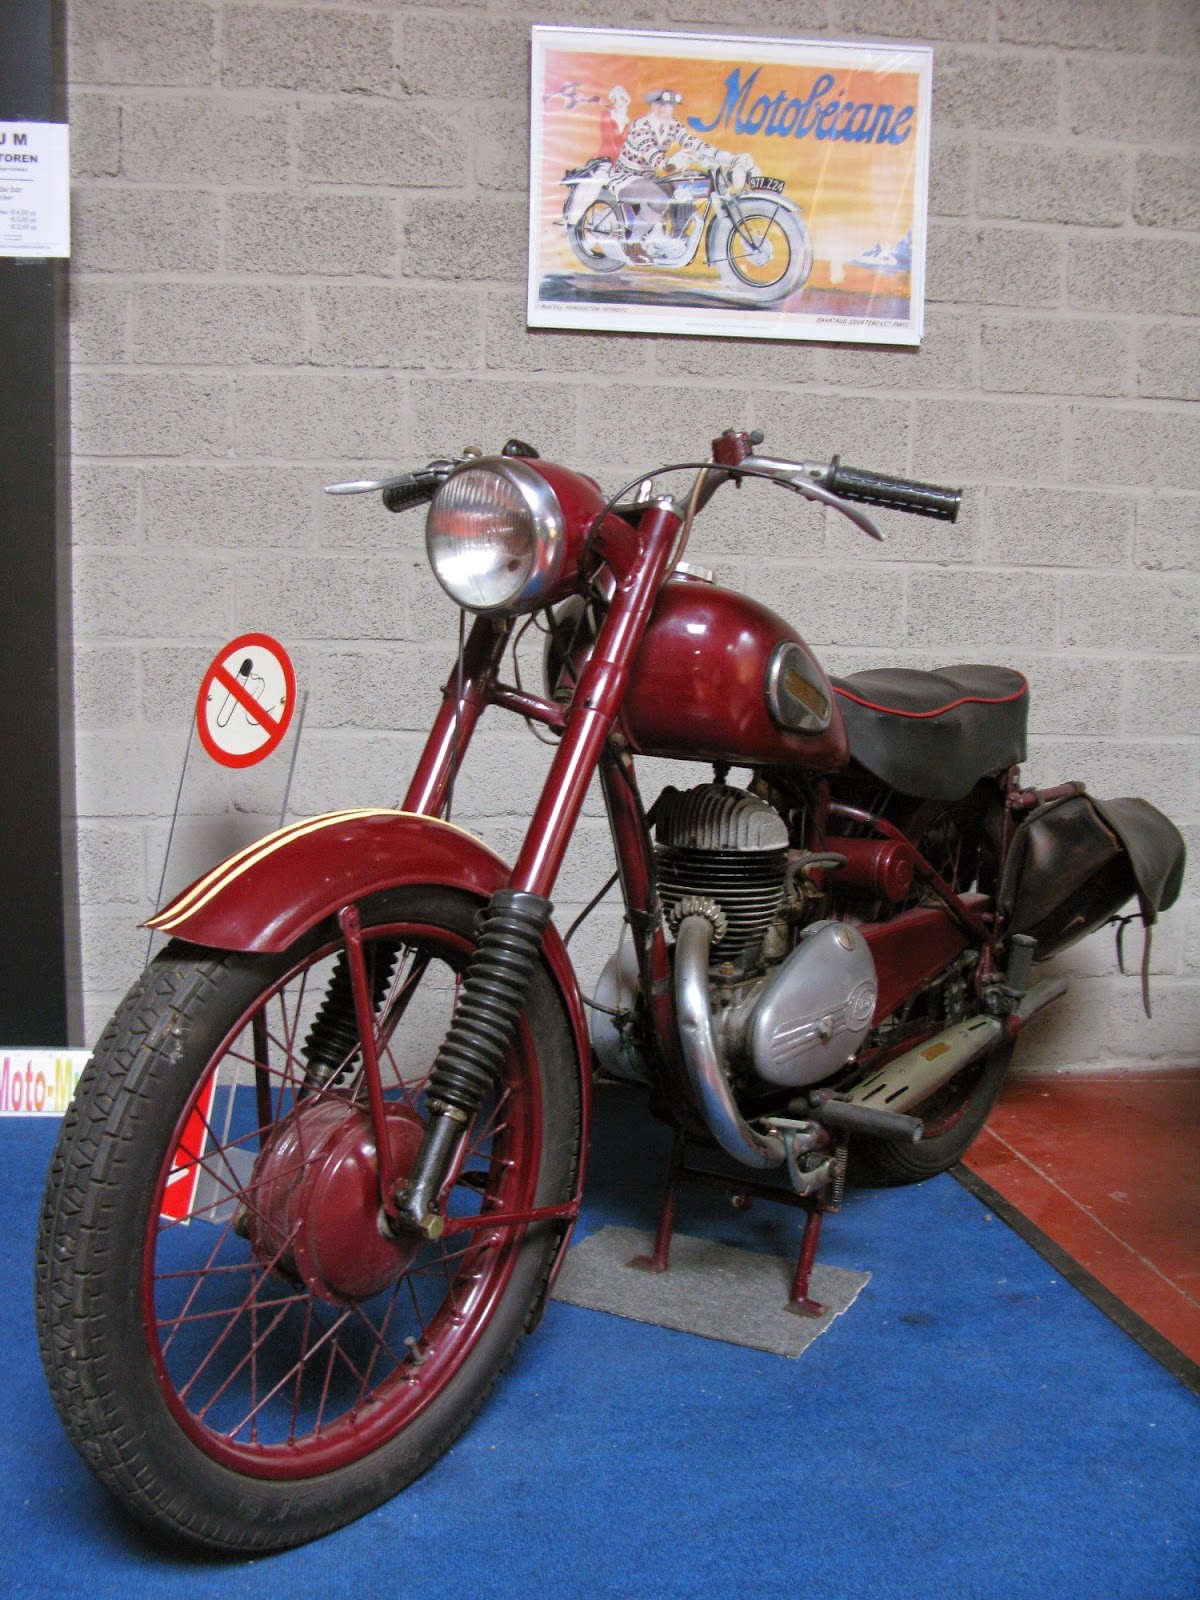 Hulsmann motorcycle with Villiers engine